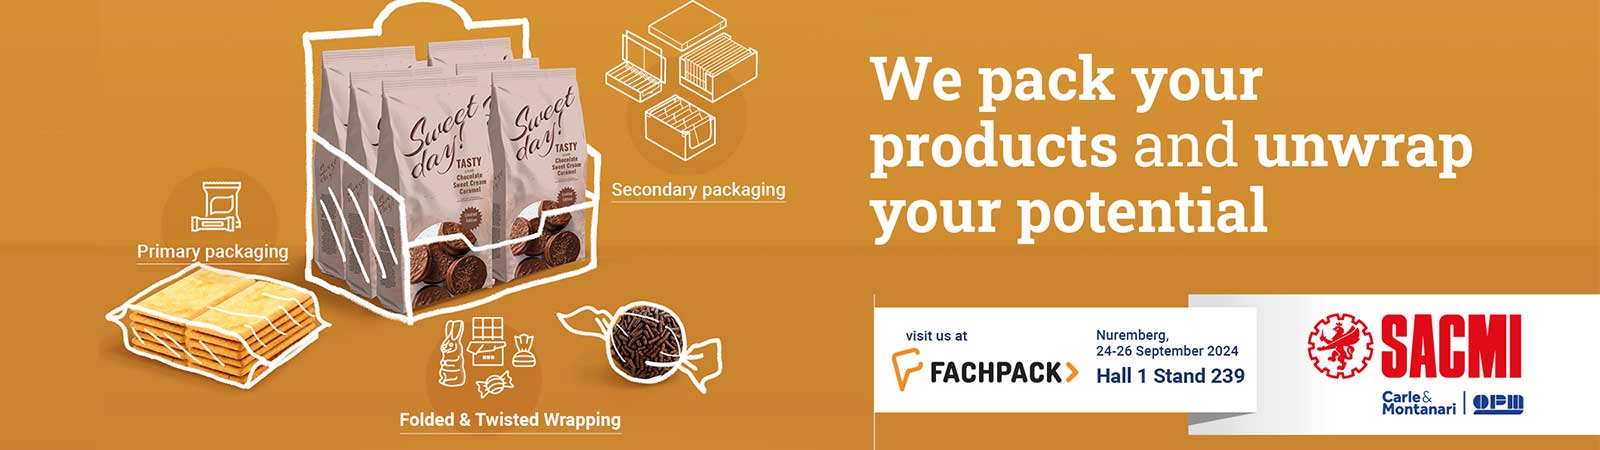 SACMI Packaging & Chocolate @ FACHPACK 2024:<br>“We pack your products and unwrap your potential”